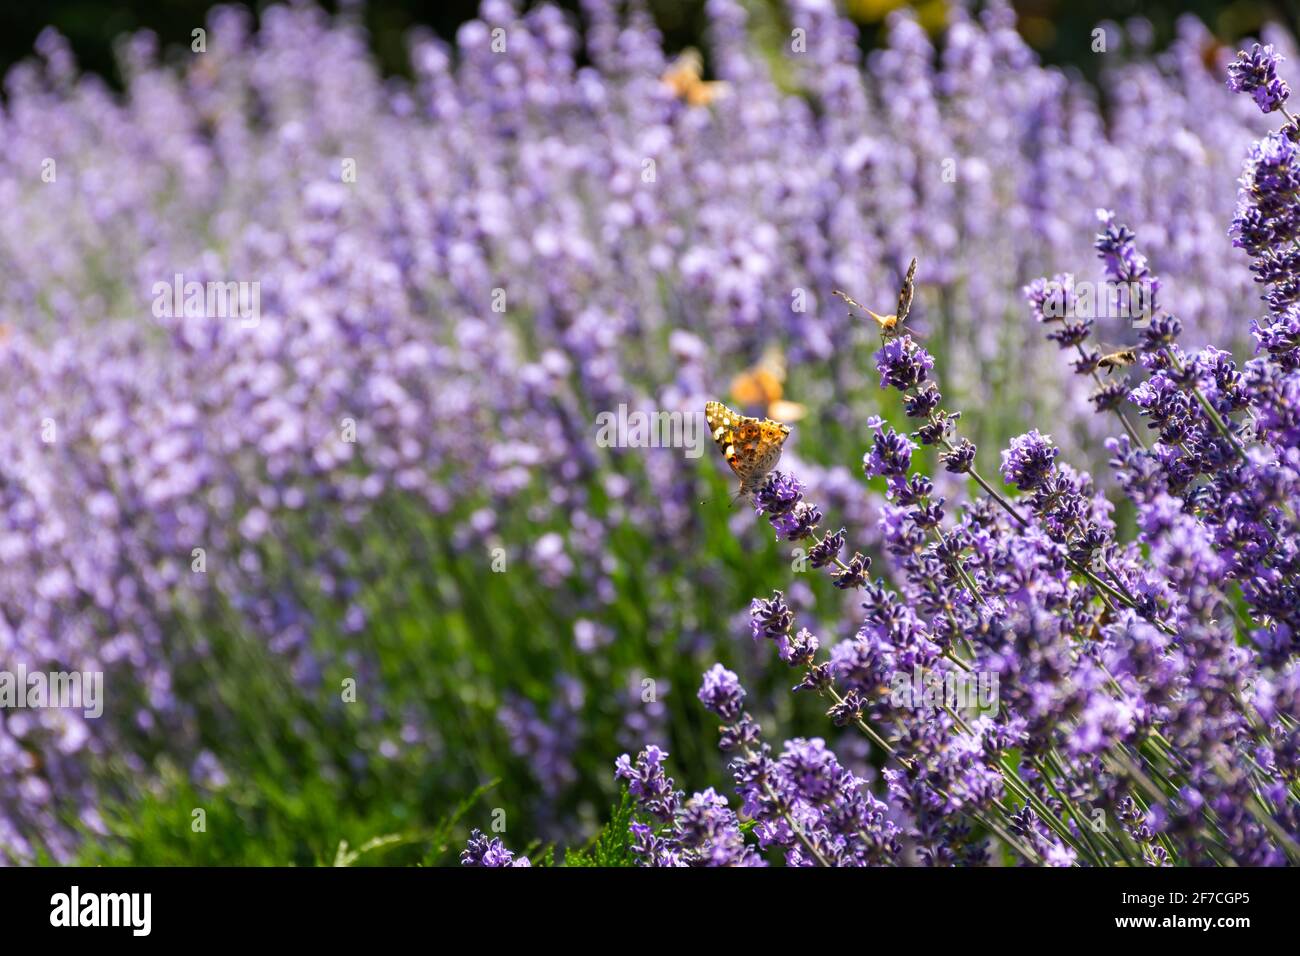 Painted lady butterfly on lavender flowers. Sunny spring background with flowers and insects. Orange butterfly on lilac flowers in soft focus. Macro p Stock Photo